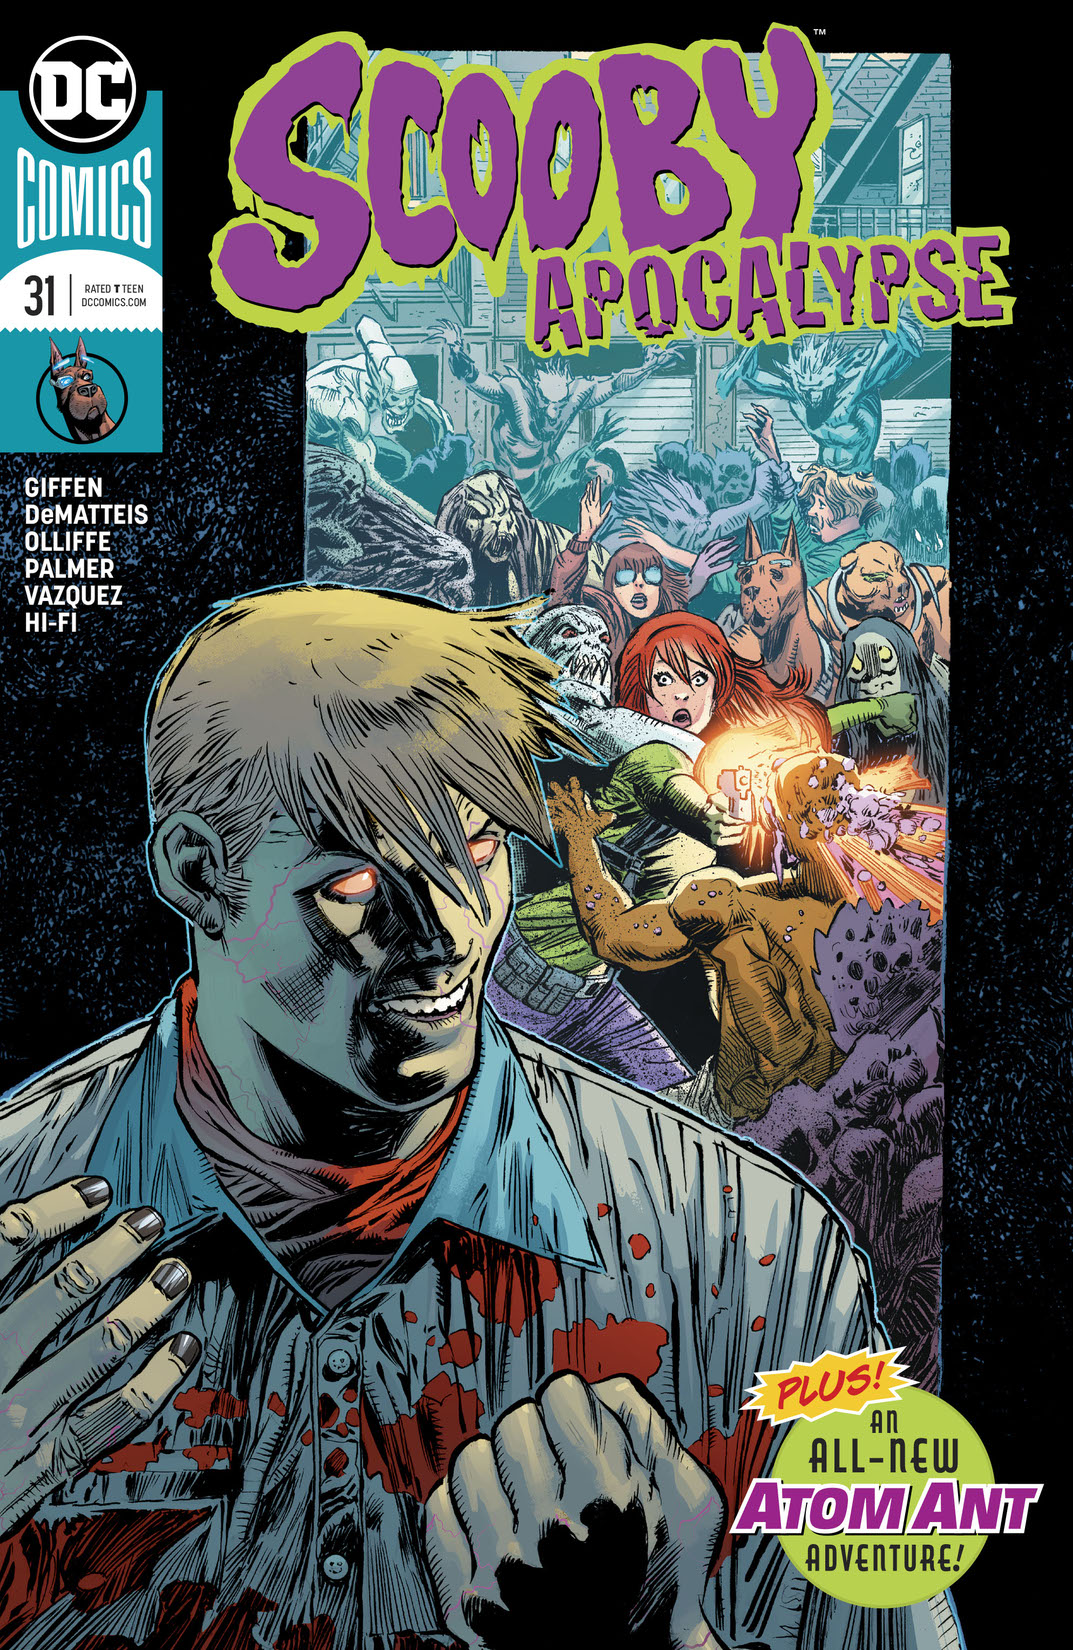 Scooby Apocalypse #31 preview images